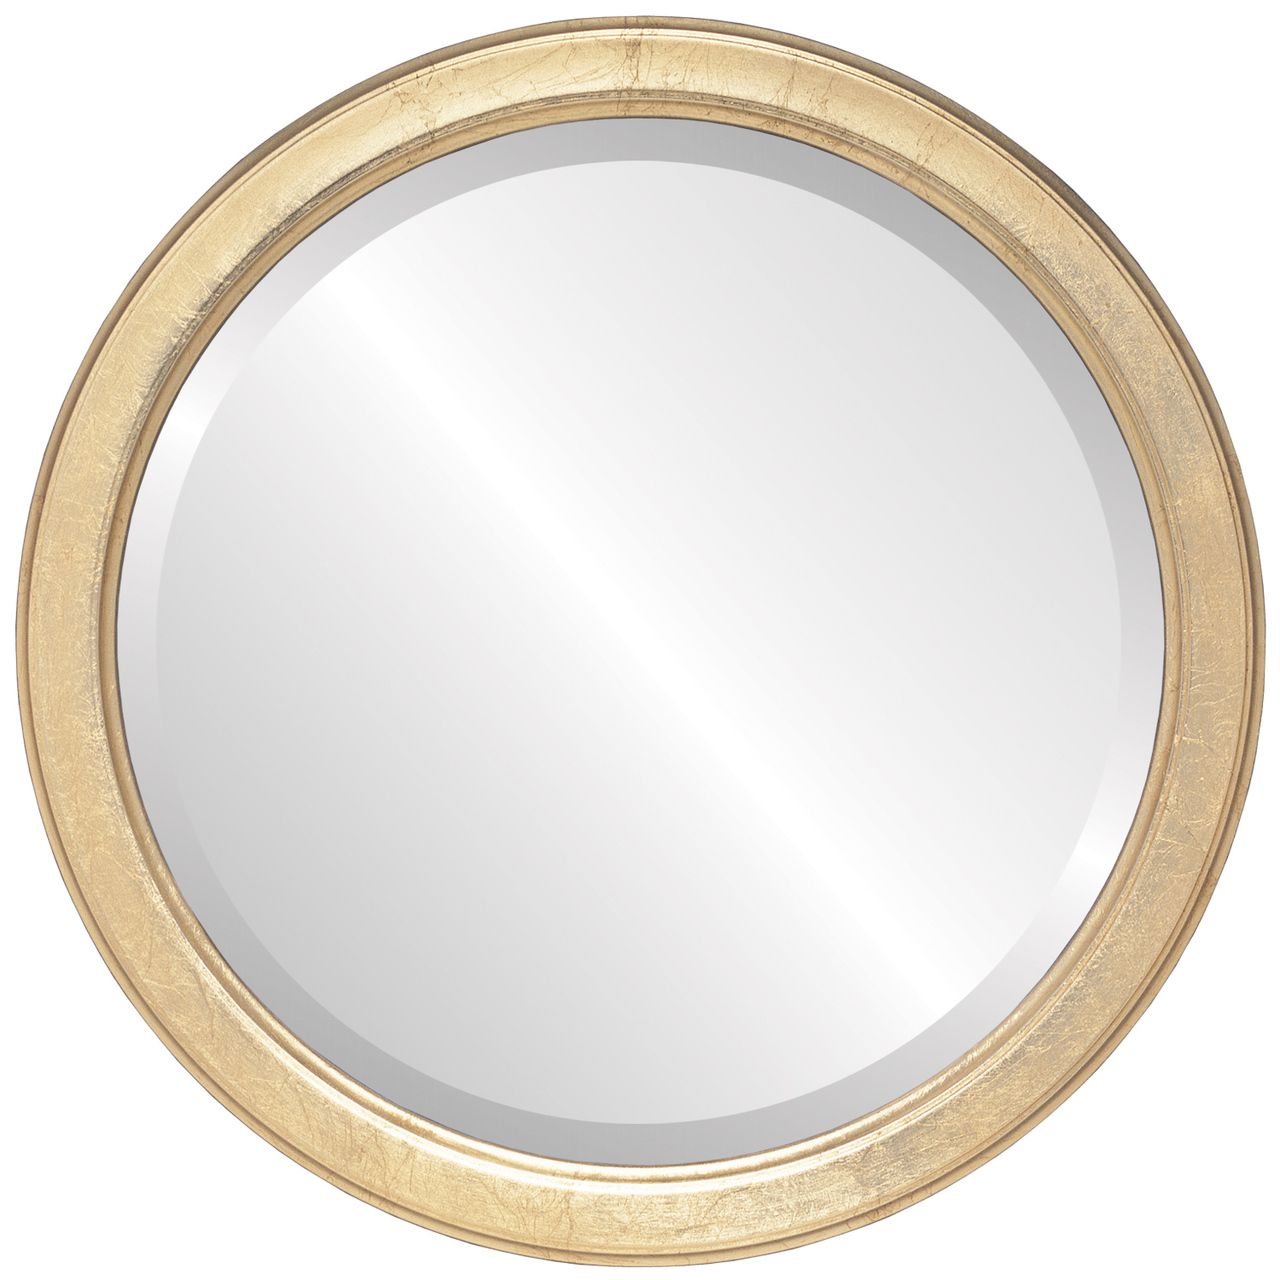 Contemporary Gold Round Mirrors From $114 | Free Shipping Inside Gold Rounded Edge Mirrors (View 1 of 15)